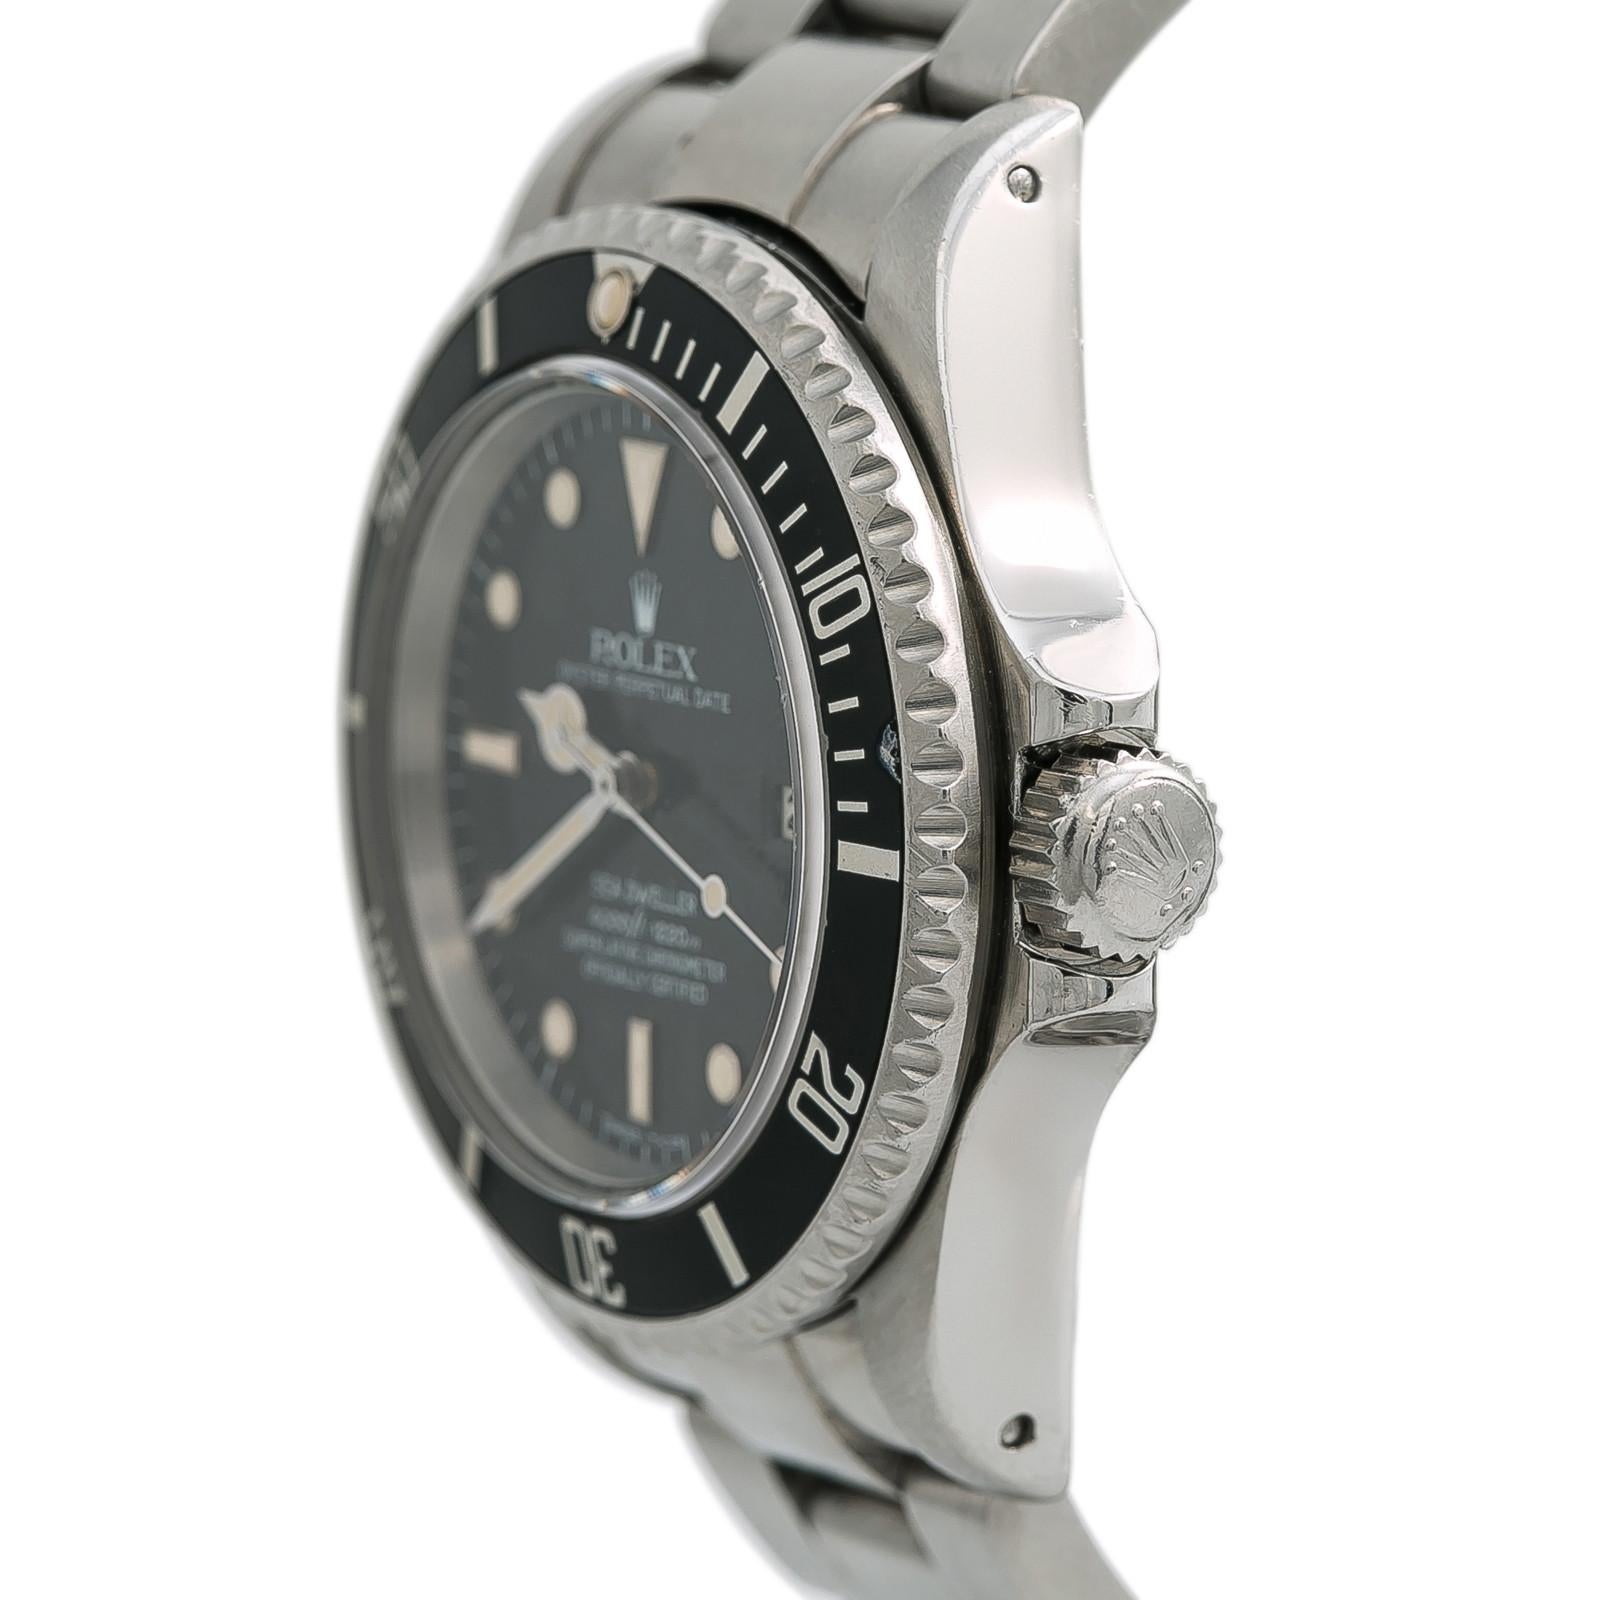 Contemporary Rolex Sea-Dweller 16660, Black Dial Certified Authentic For Sale